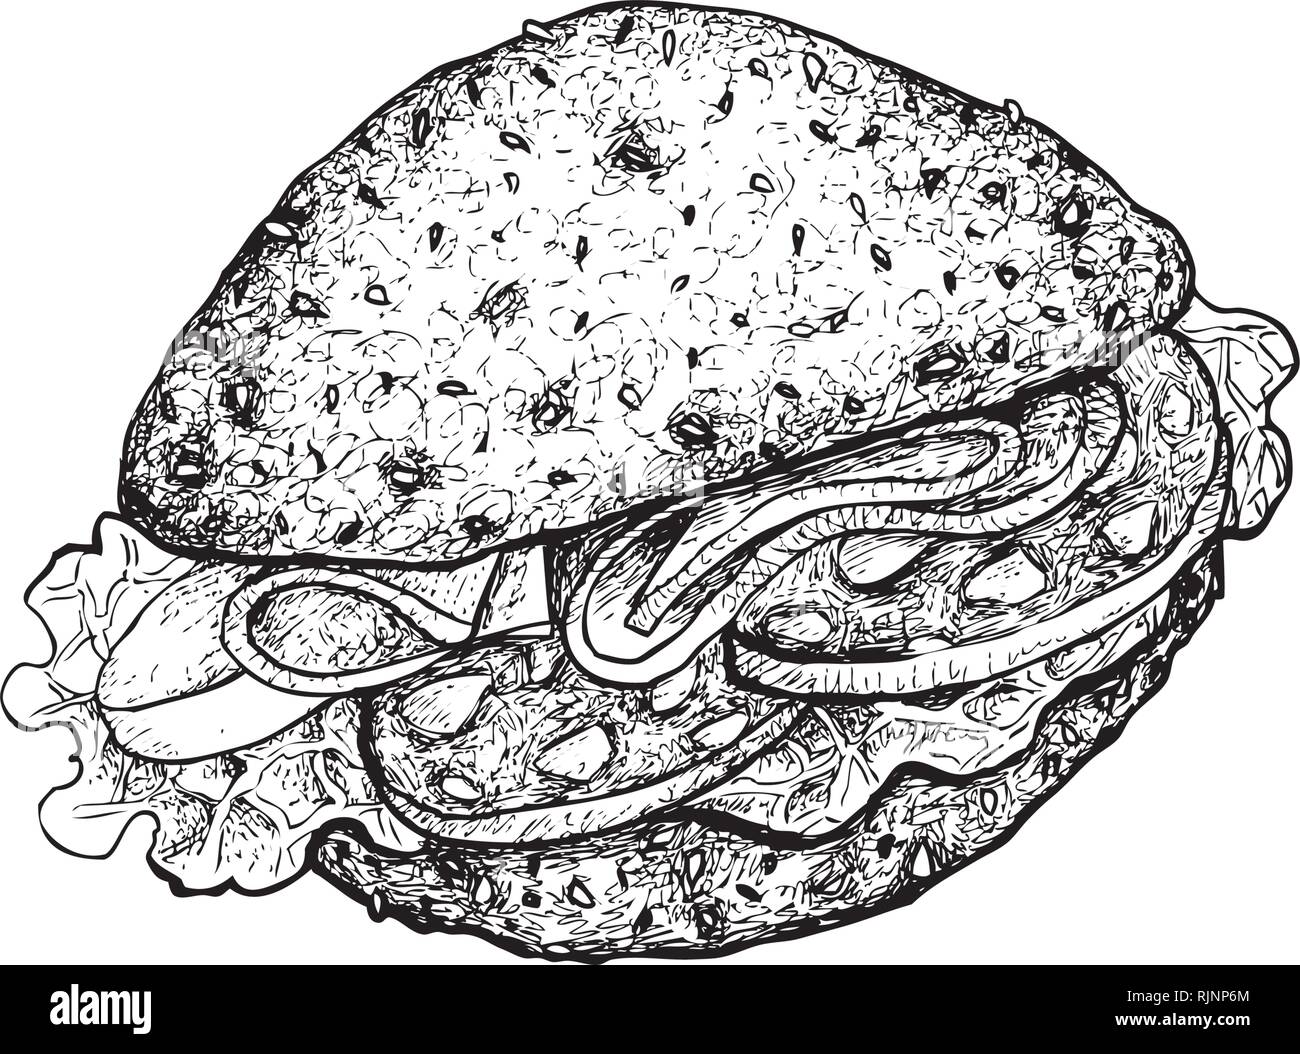 Illustration Hand Drawn Sketch of Delicious Homemade Freshly Healthy Whole Grain Bread Sandwich with Bacon, Lettuce, Tomato, Cheese and Lettuce Isolat Stock Vector